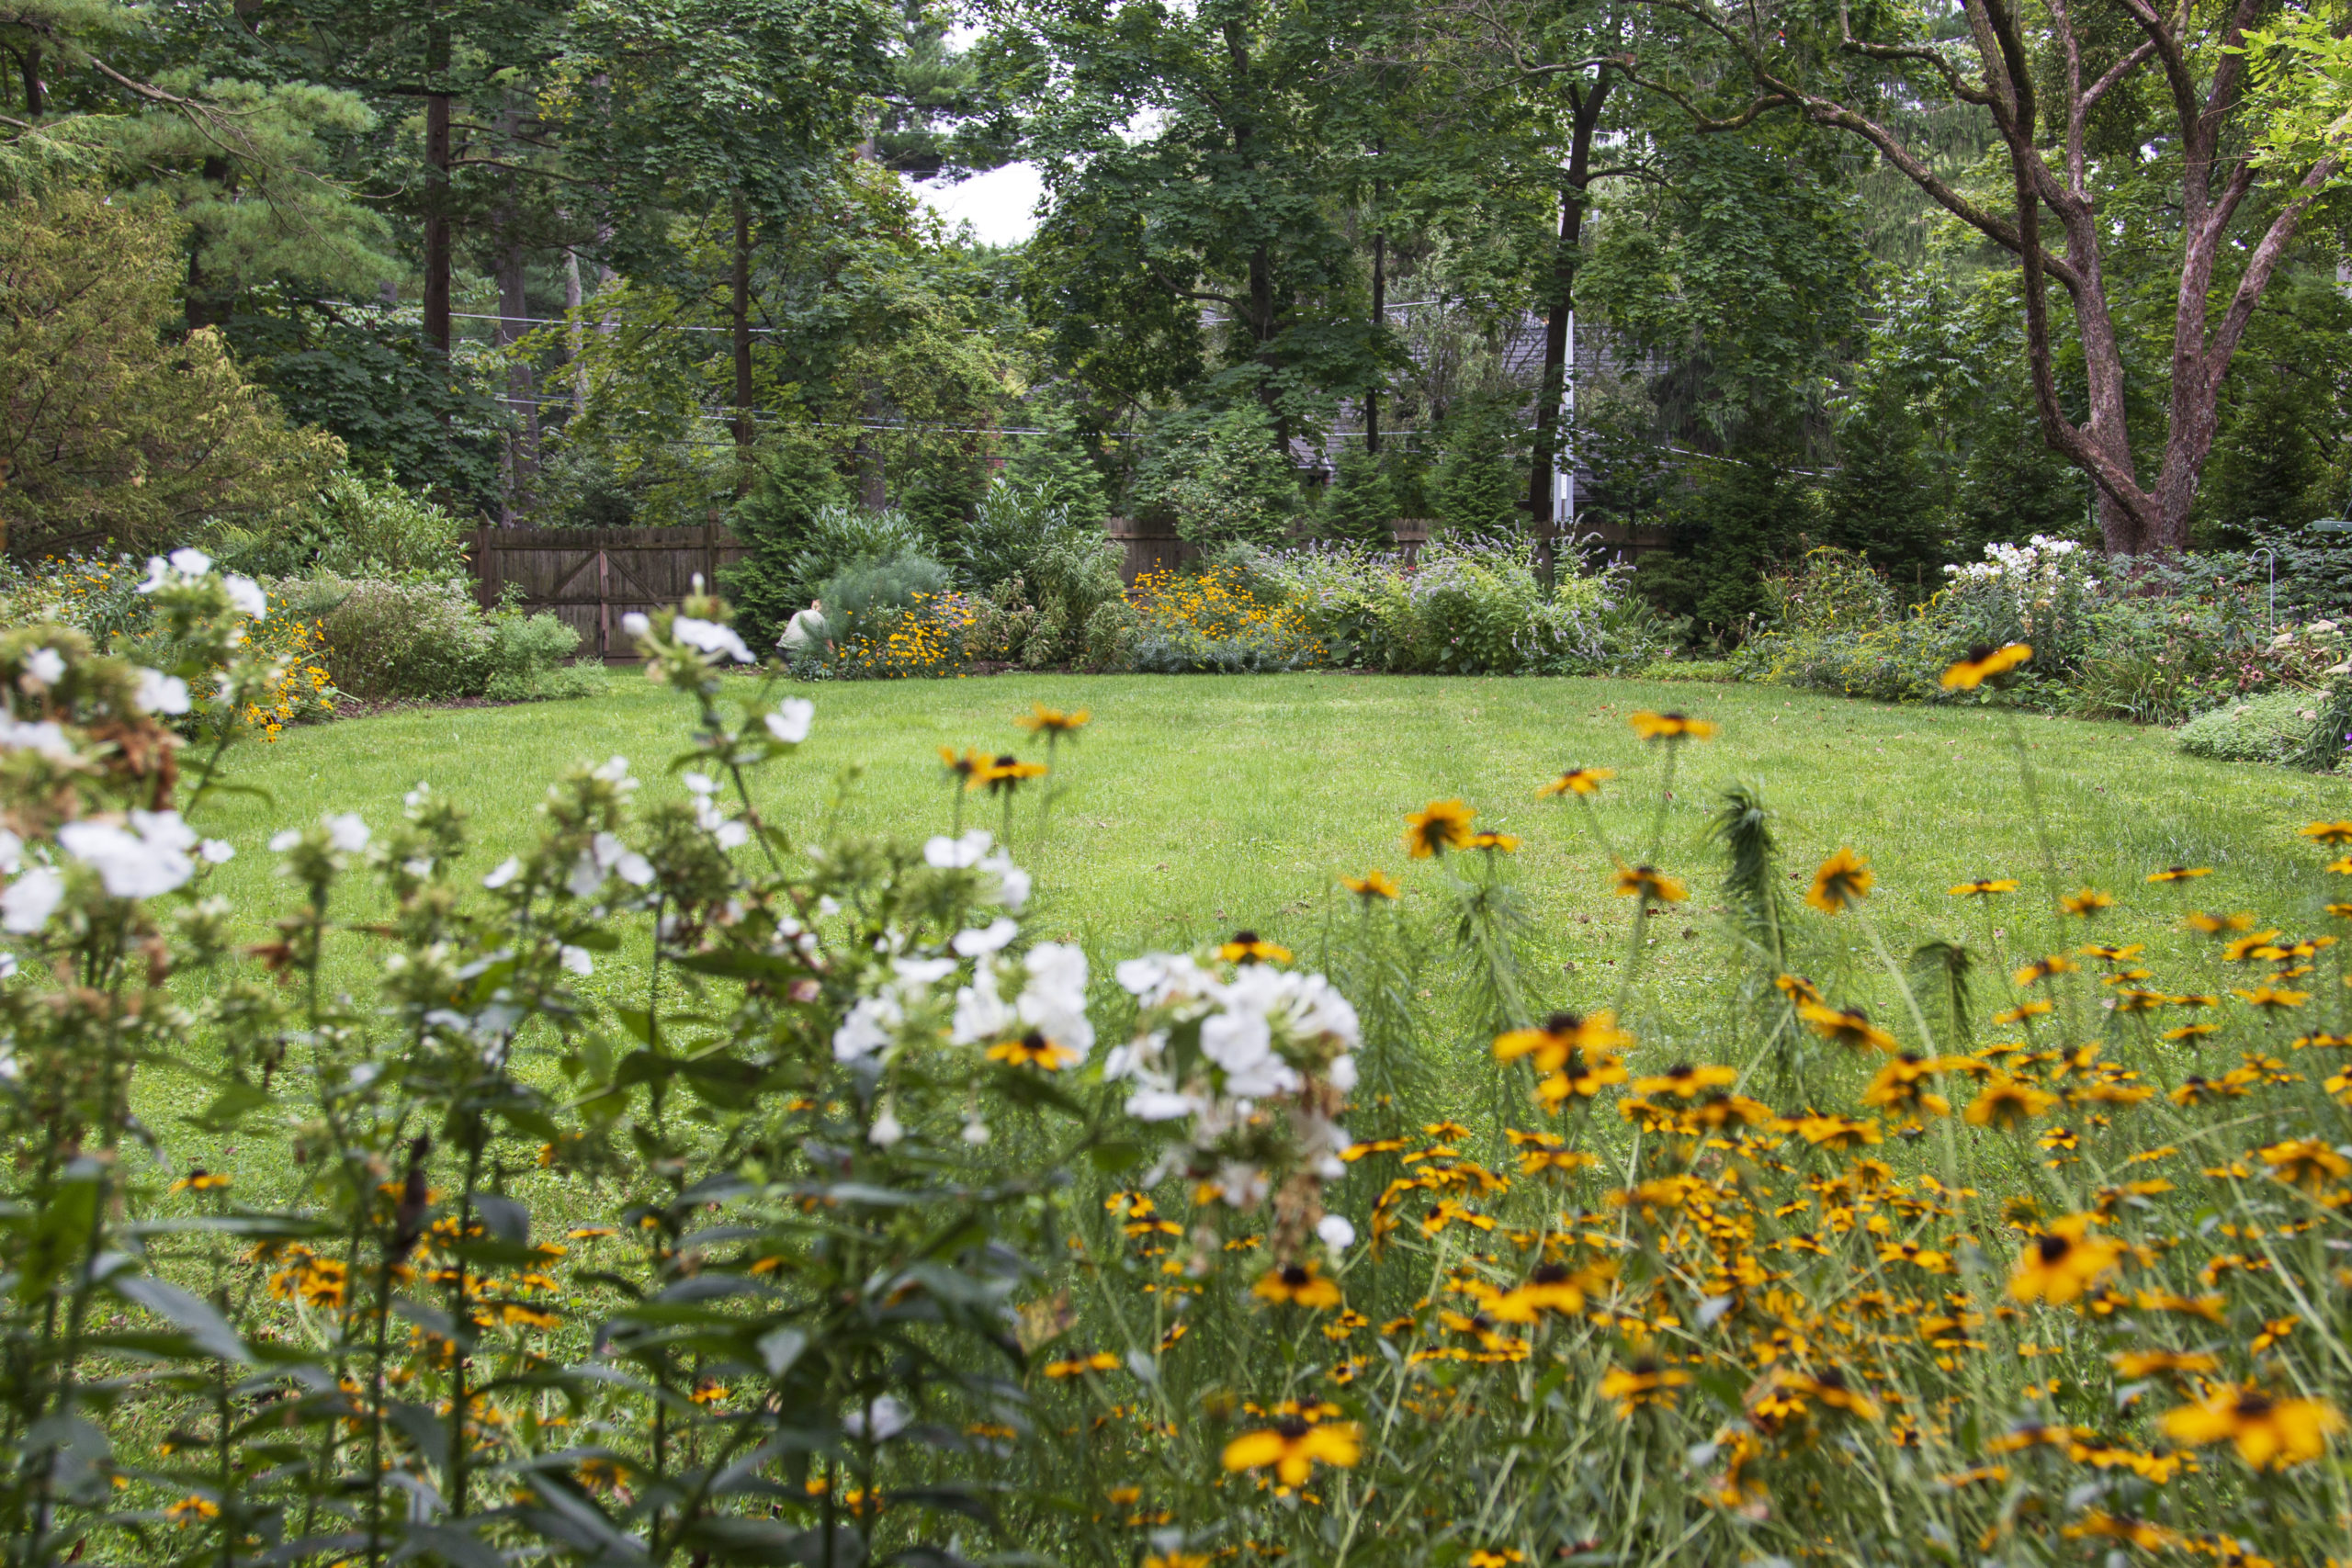 A view across a large, formal lawn that is bordered by colorful native perennial beds.